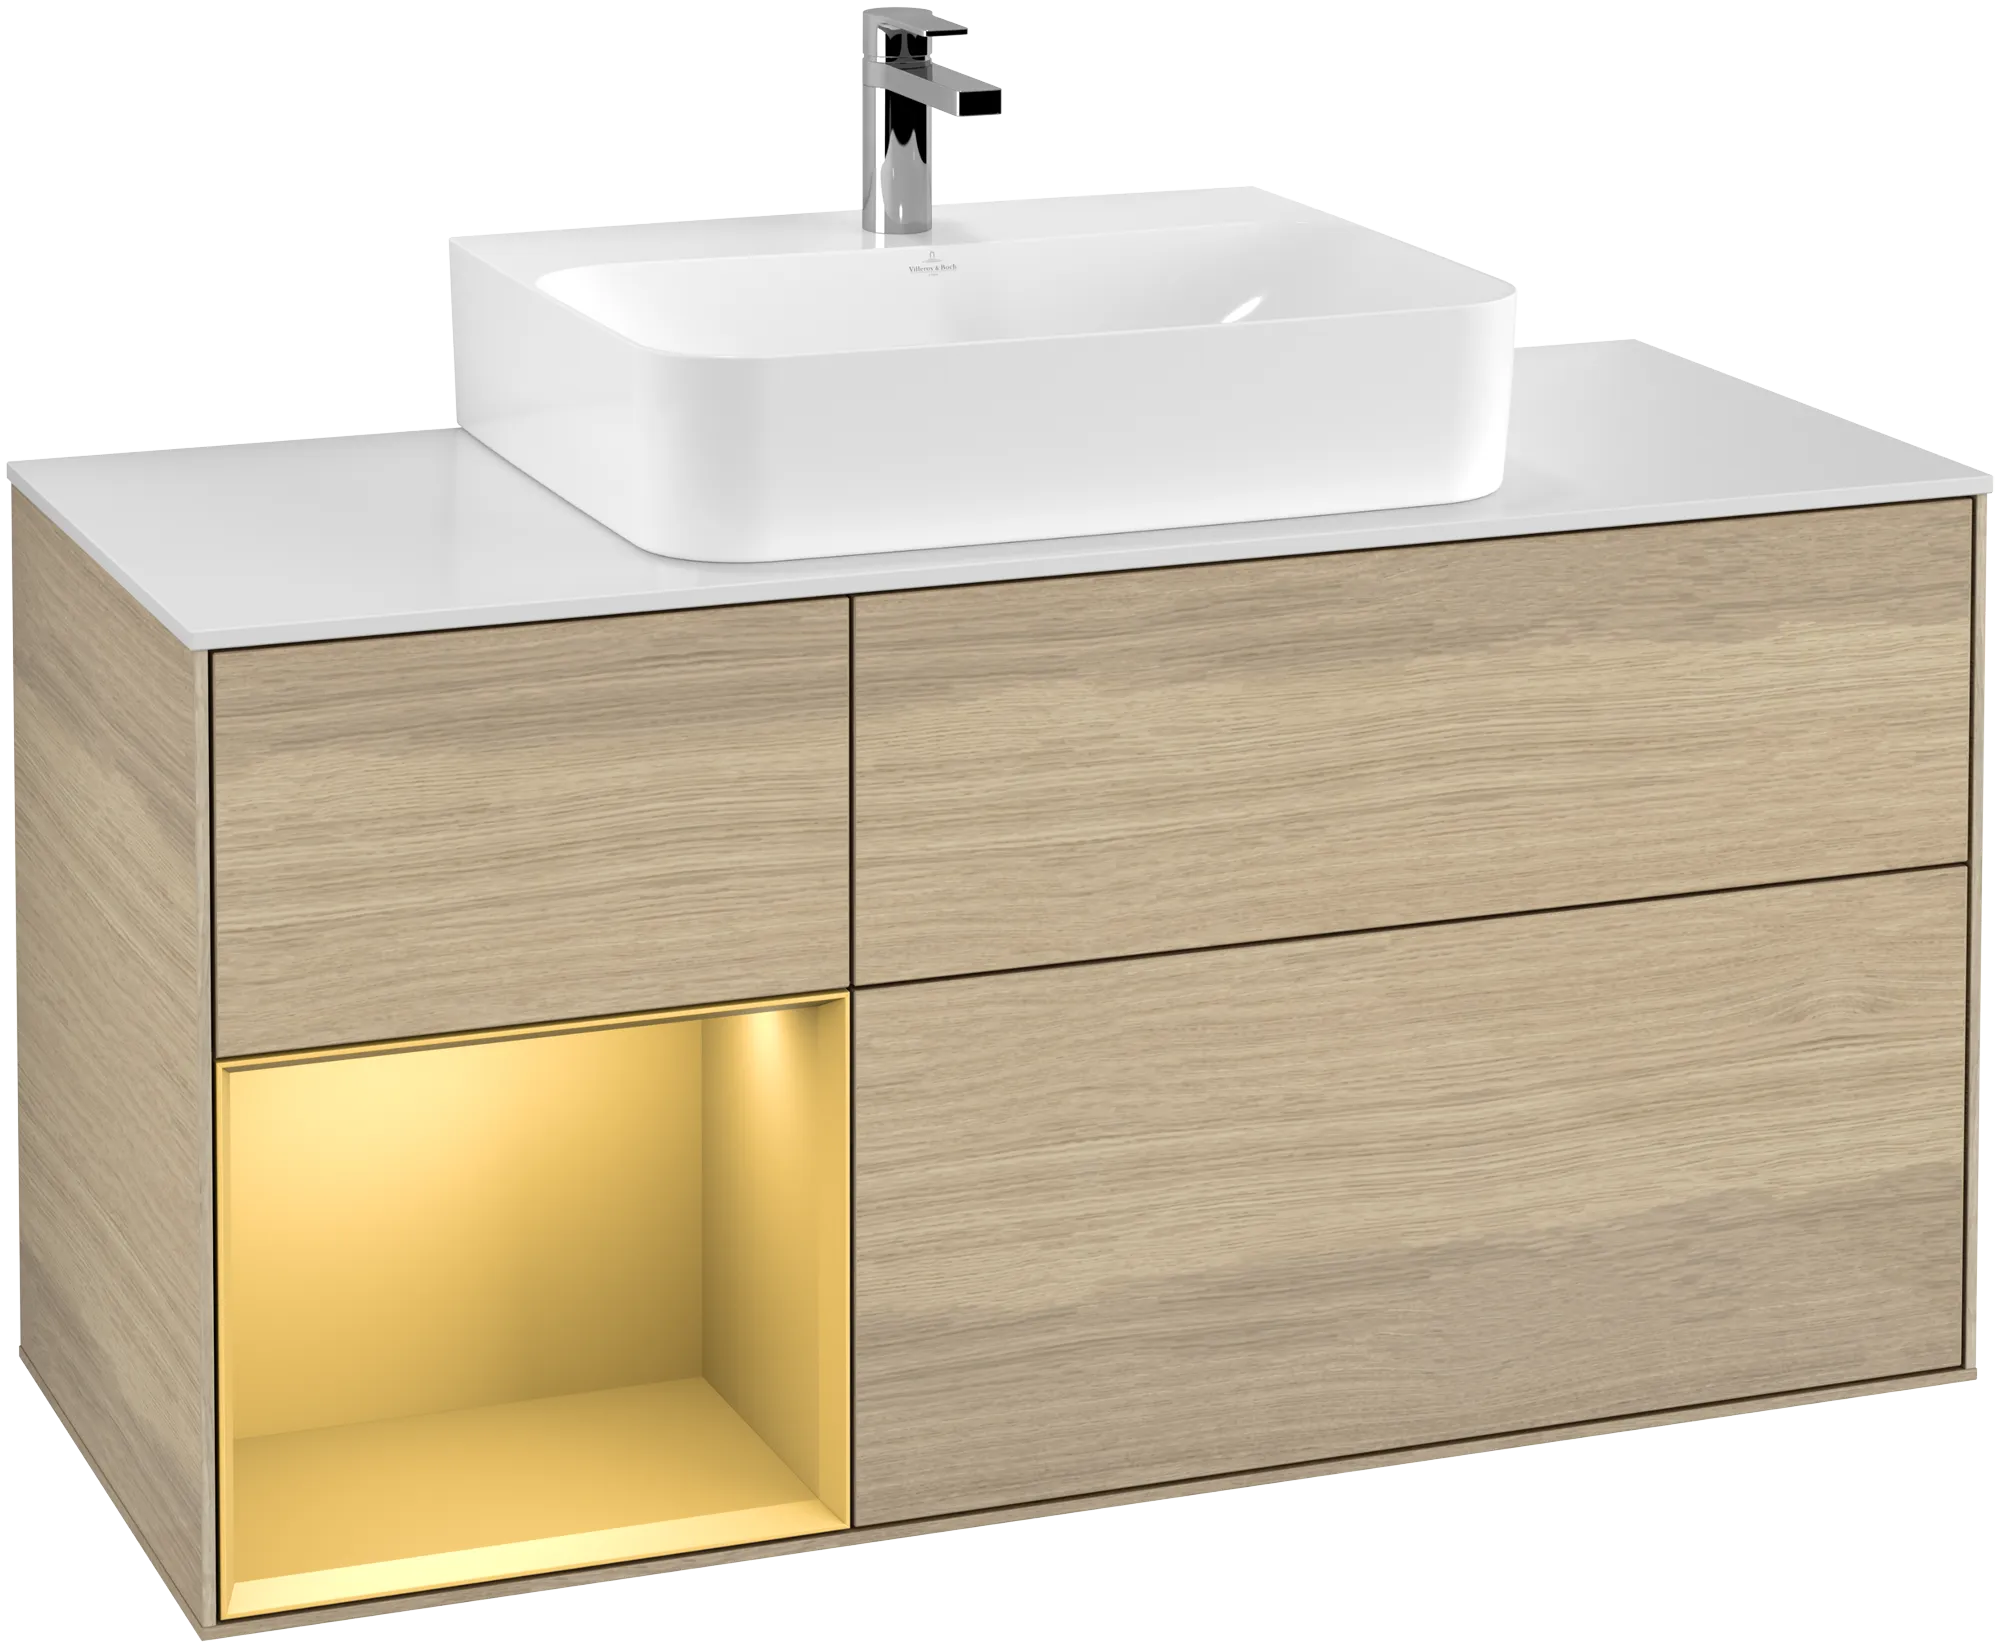 Picture of VILLEROY BOCH Finion Vanity unit, with lighting, 3 pull-out compartments, 1200 x 603 x 501 mm, Oak Veneer / Gold Matt Lacquer / Glass White Matt #G161HFPC